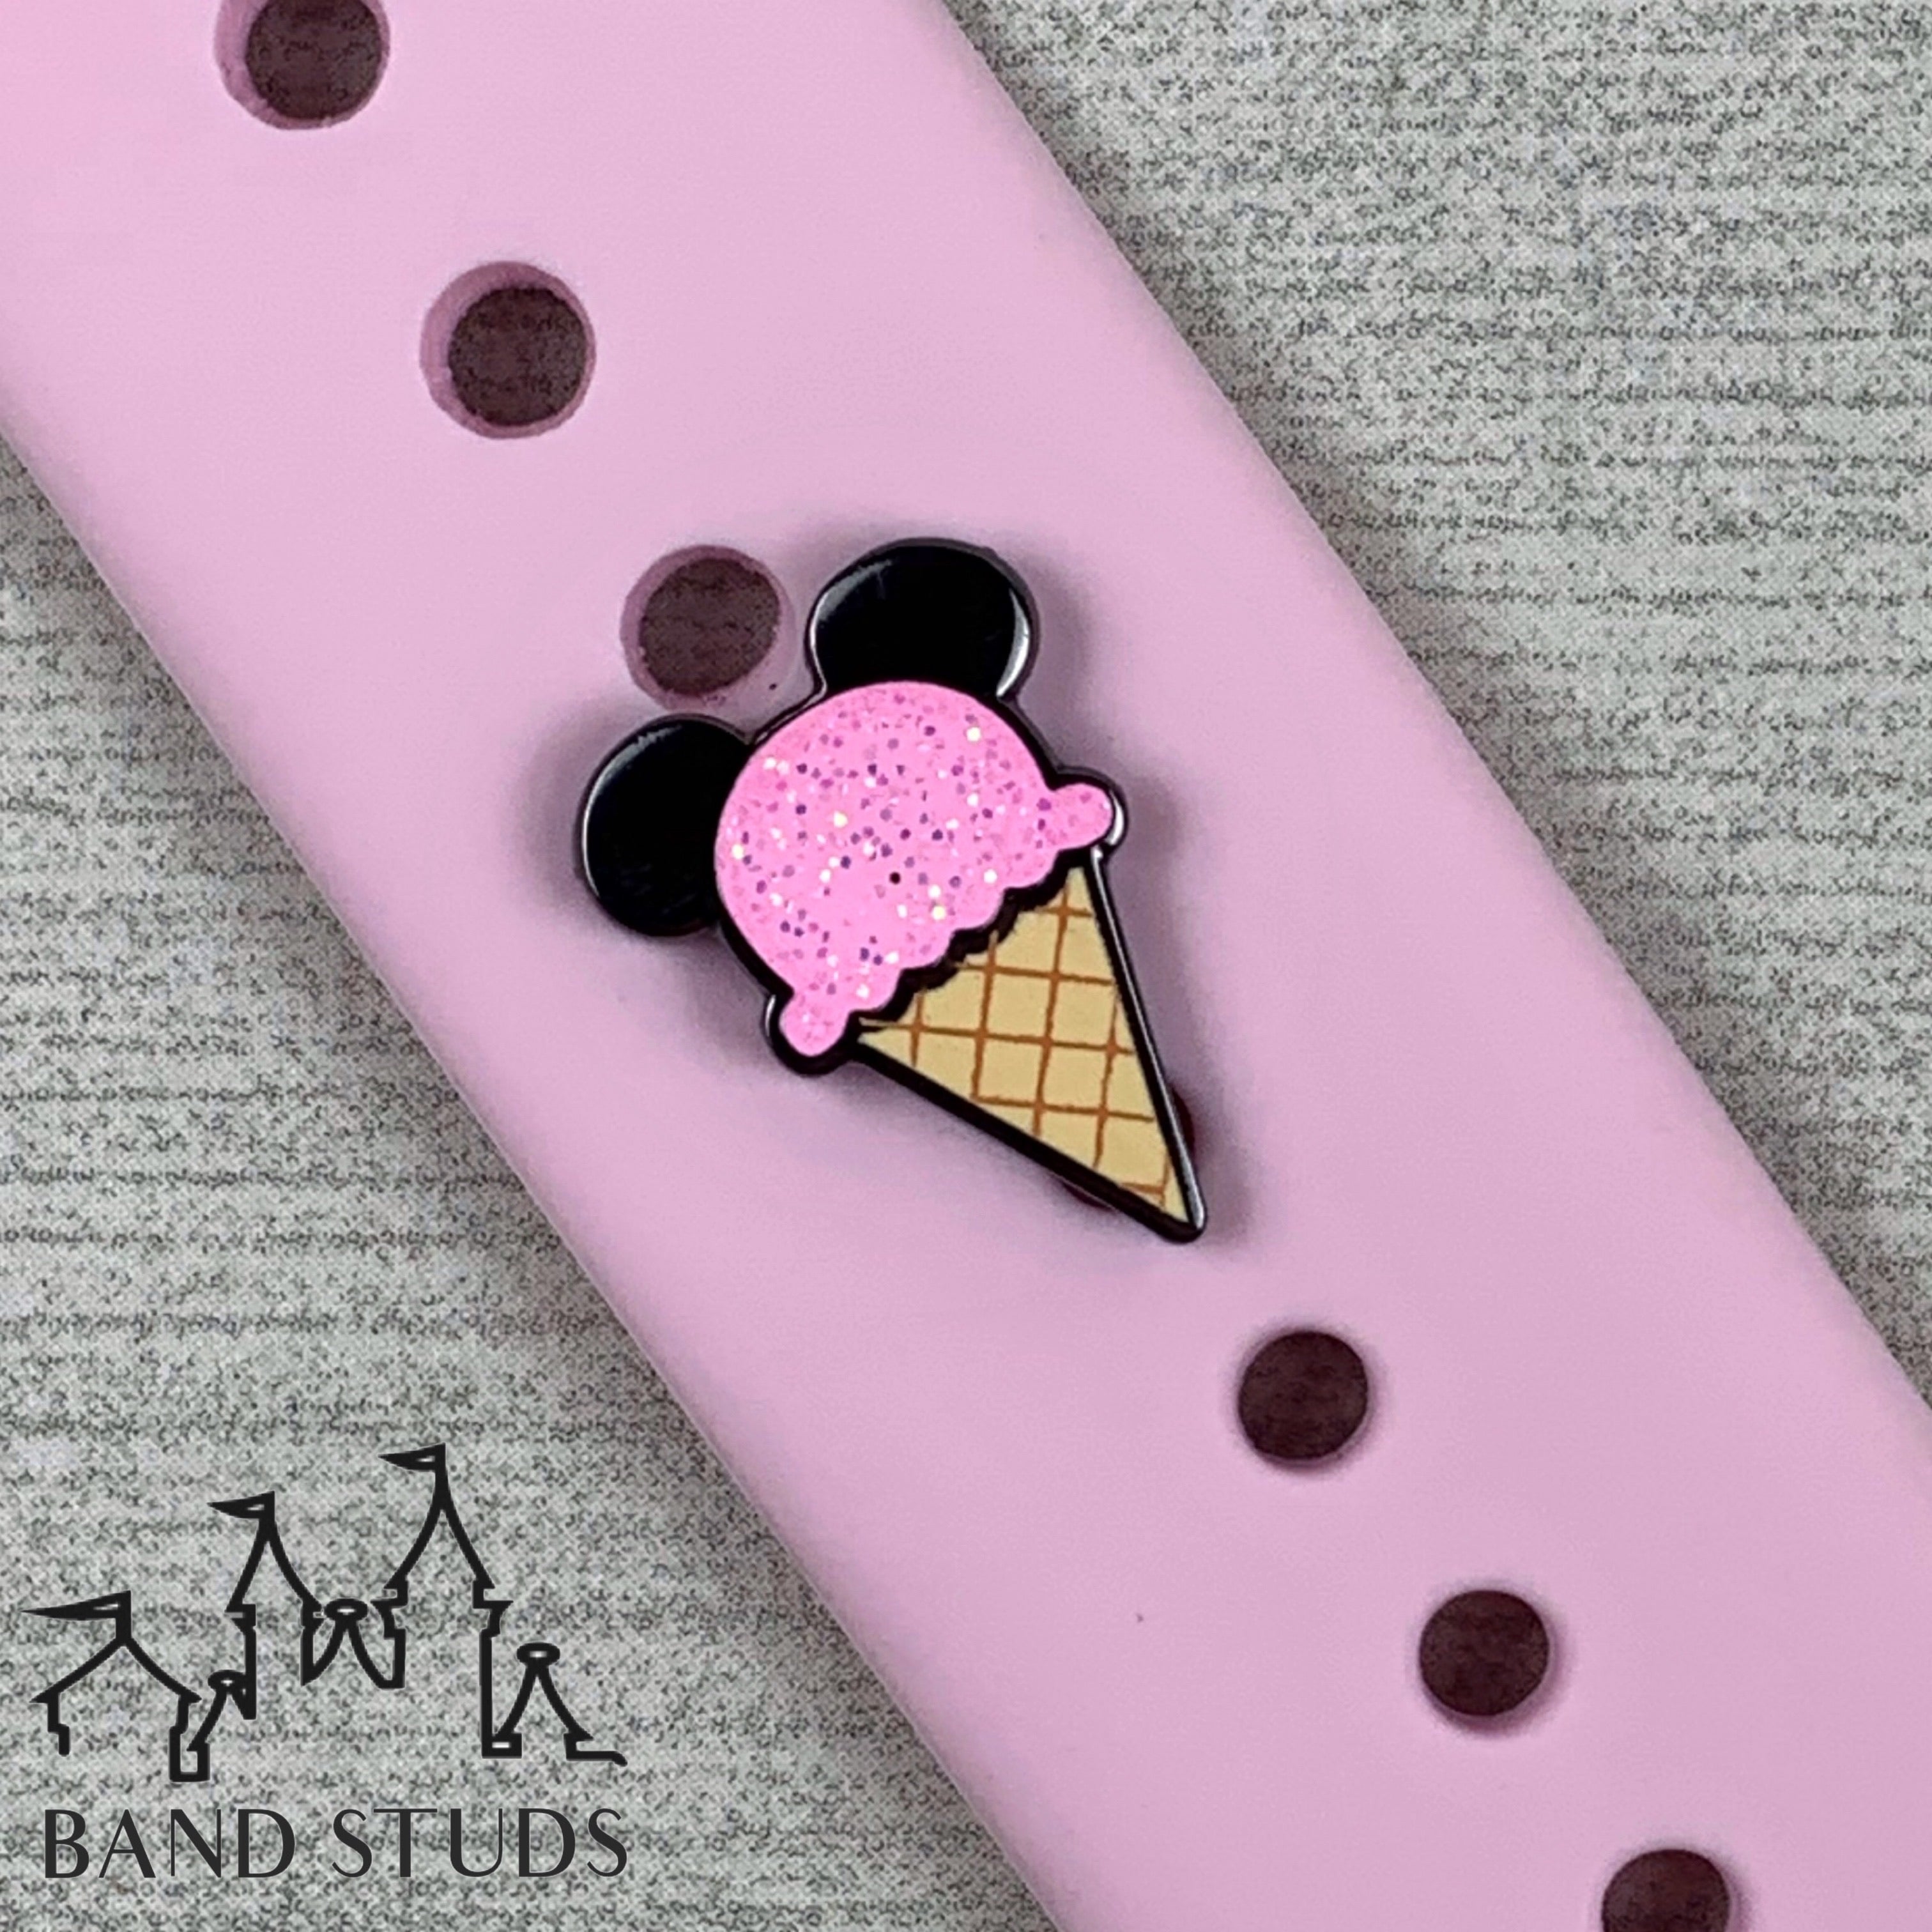 Band Stud® - Snacks - cones Mr. Mouse MARKDOWN